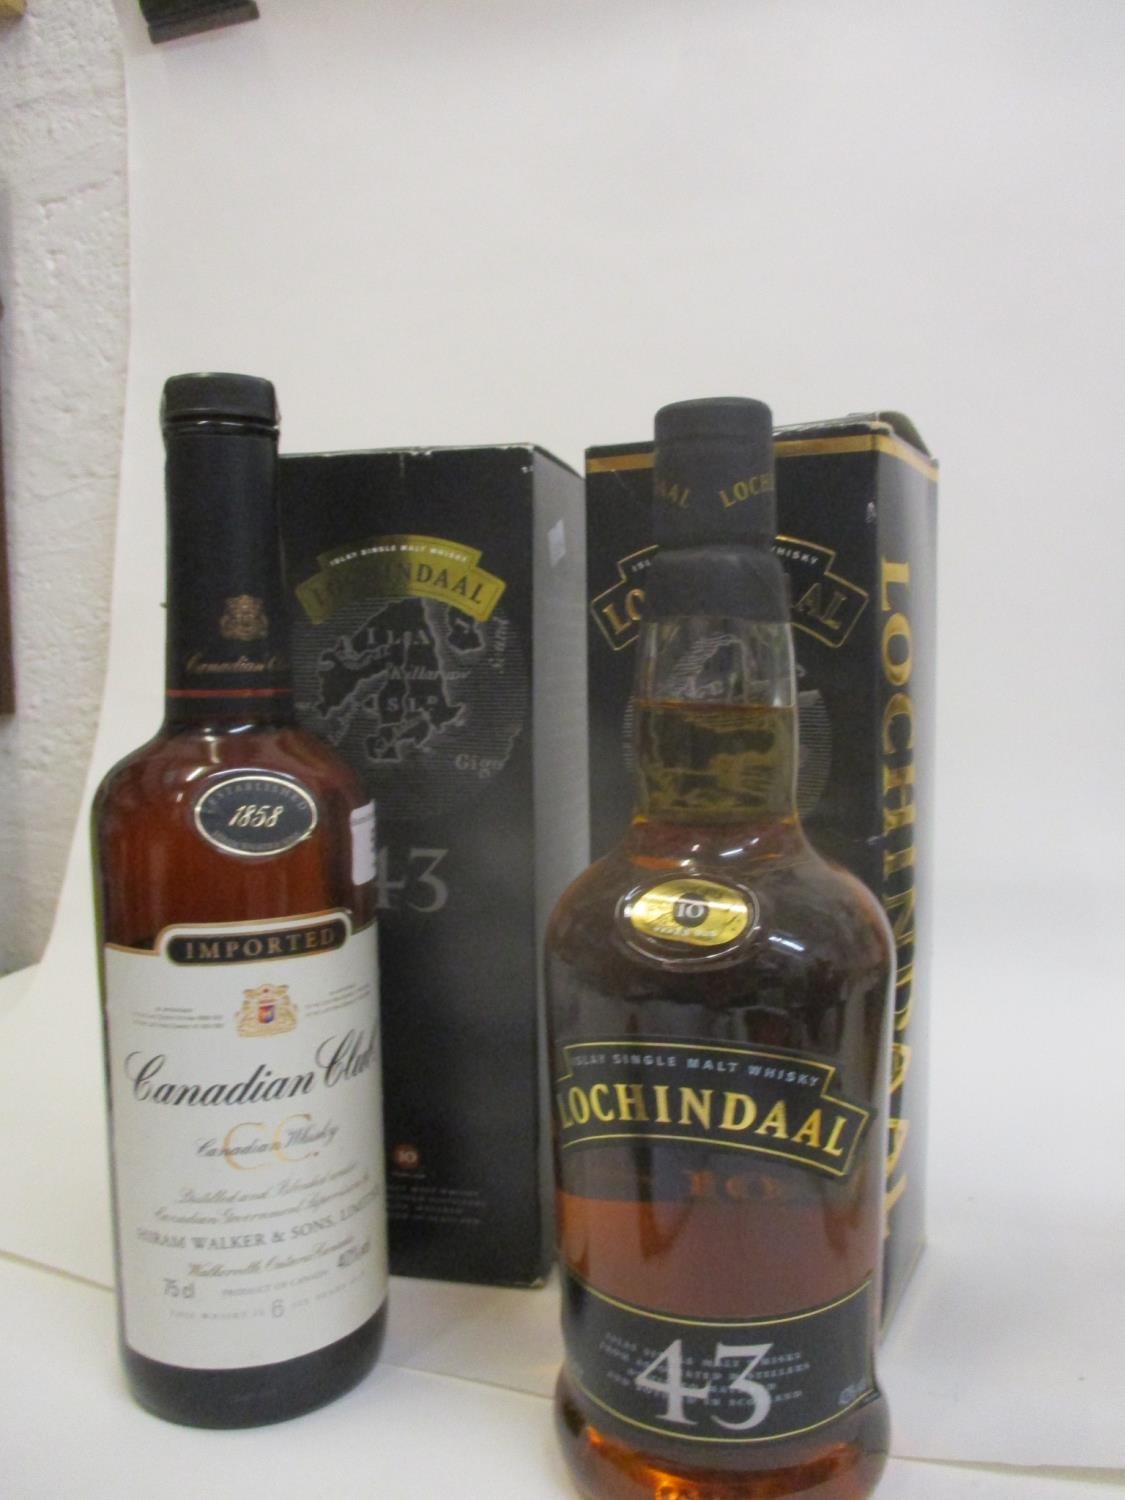 One bottle of Canadian Club whisky, 75cl, two bottles of Lochindaal - Image 3 of 4